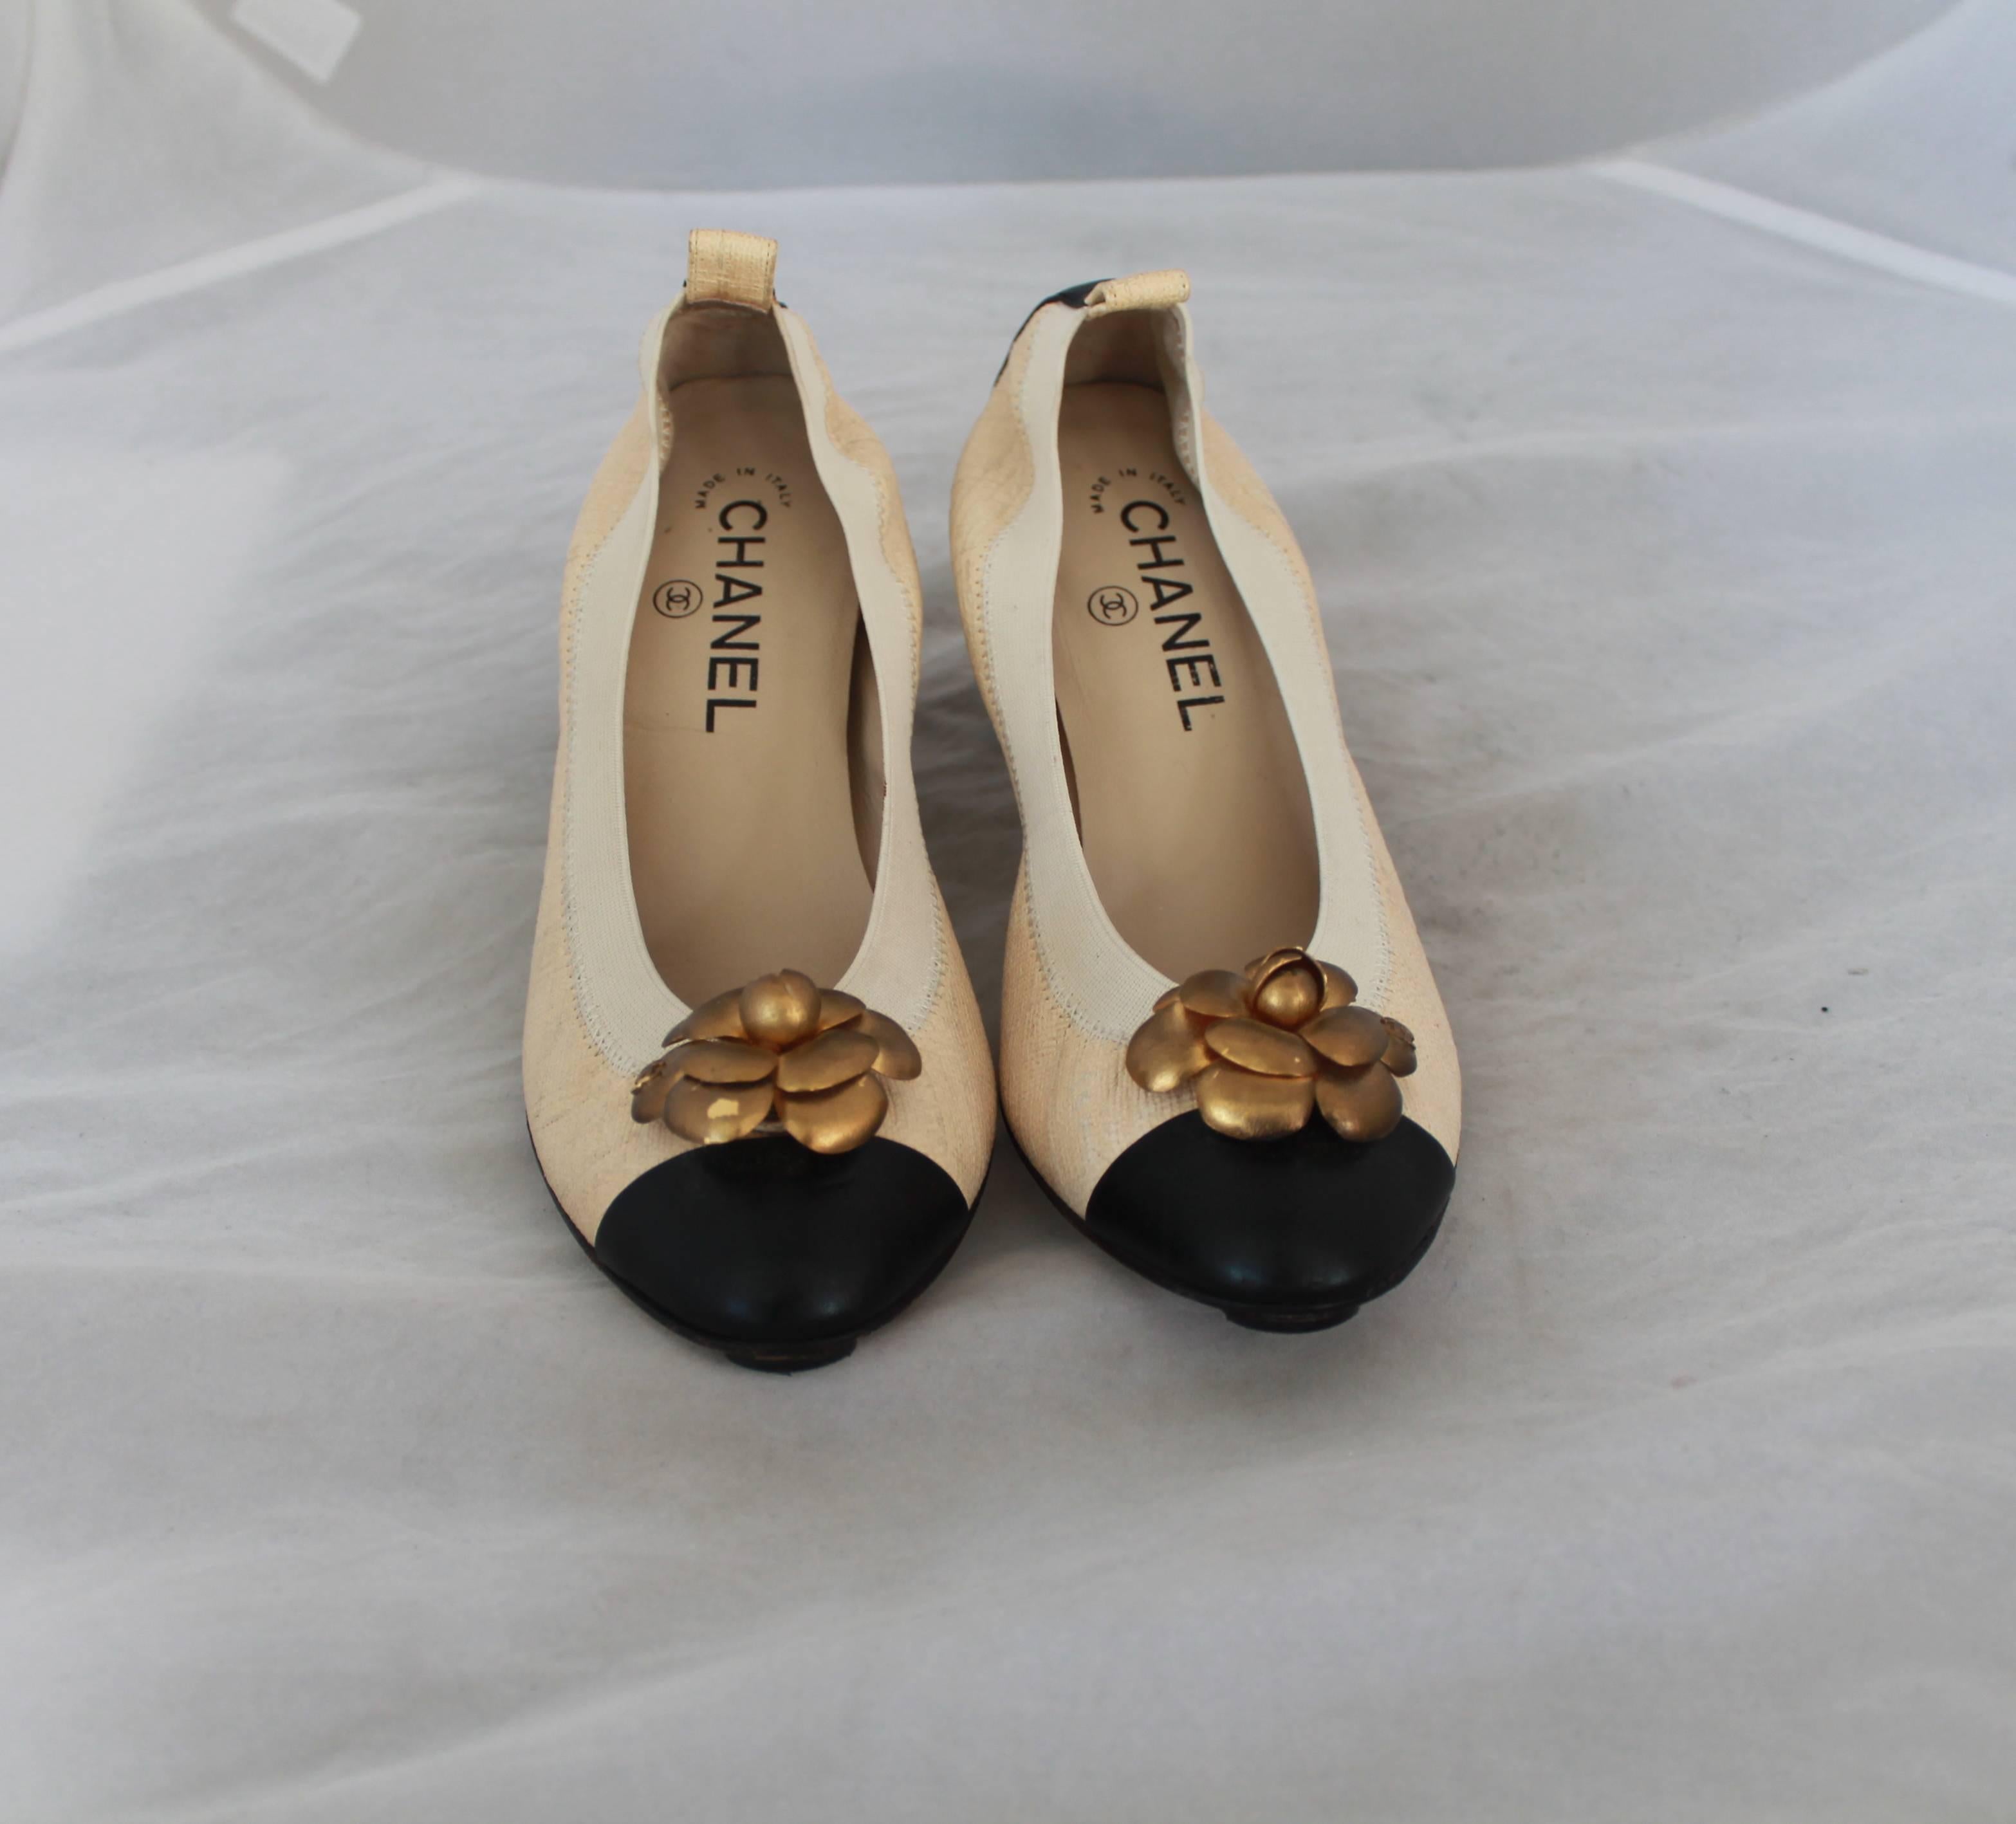 Chanel Beige Textured  Leather Scrunch Pumps w/ Black Toe & Gold Camellia - 37.  These scrunch pumps are made of leather textured with a linen look.  They have a black leather toe and a gold leather Camellia with 